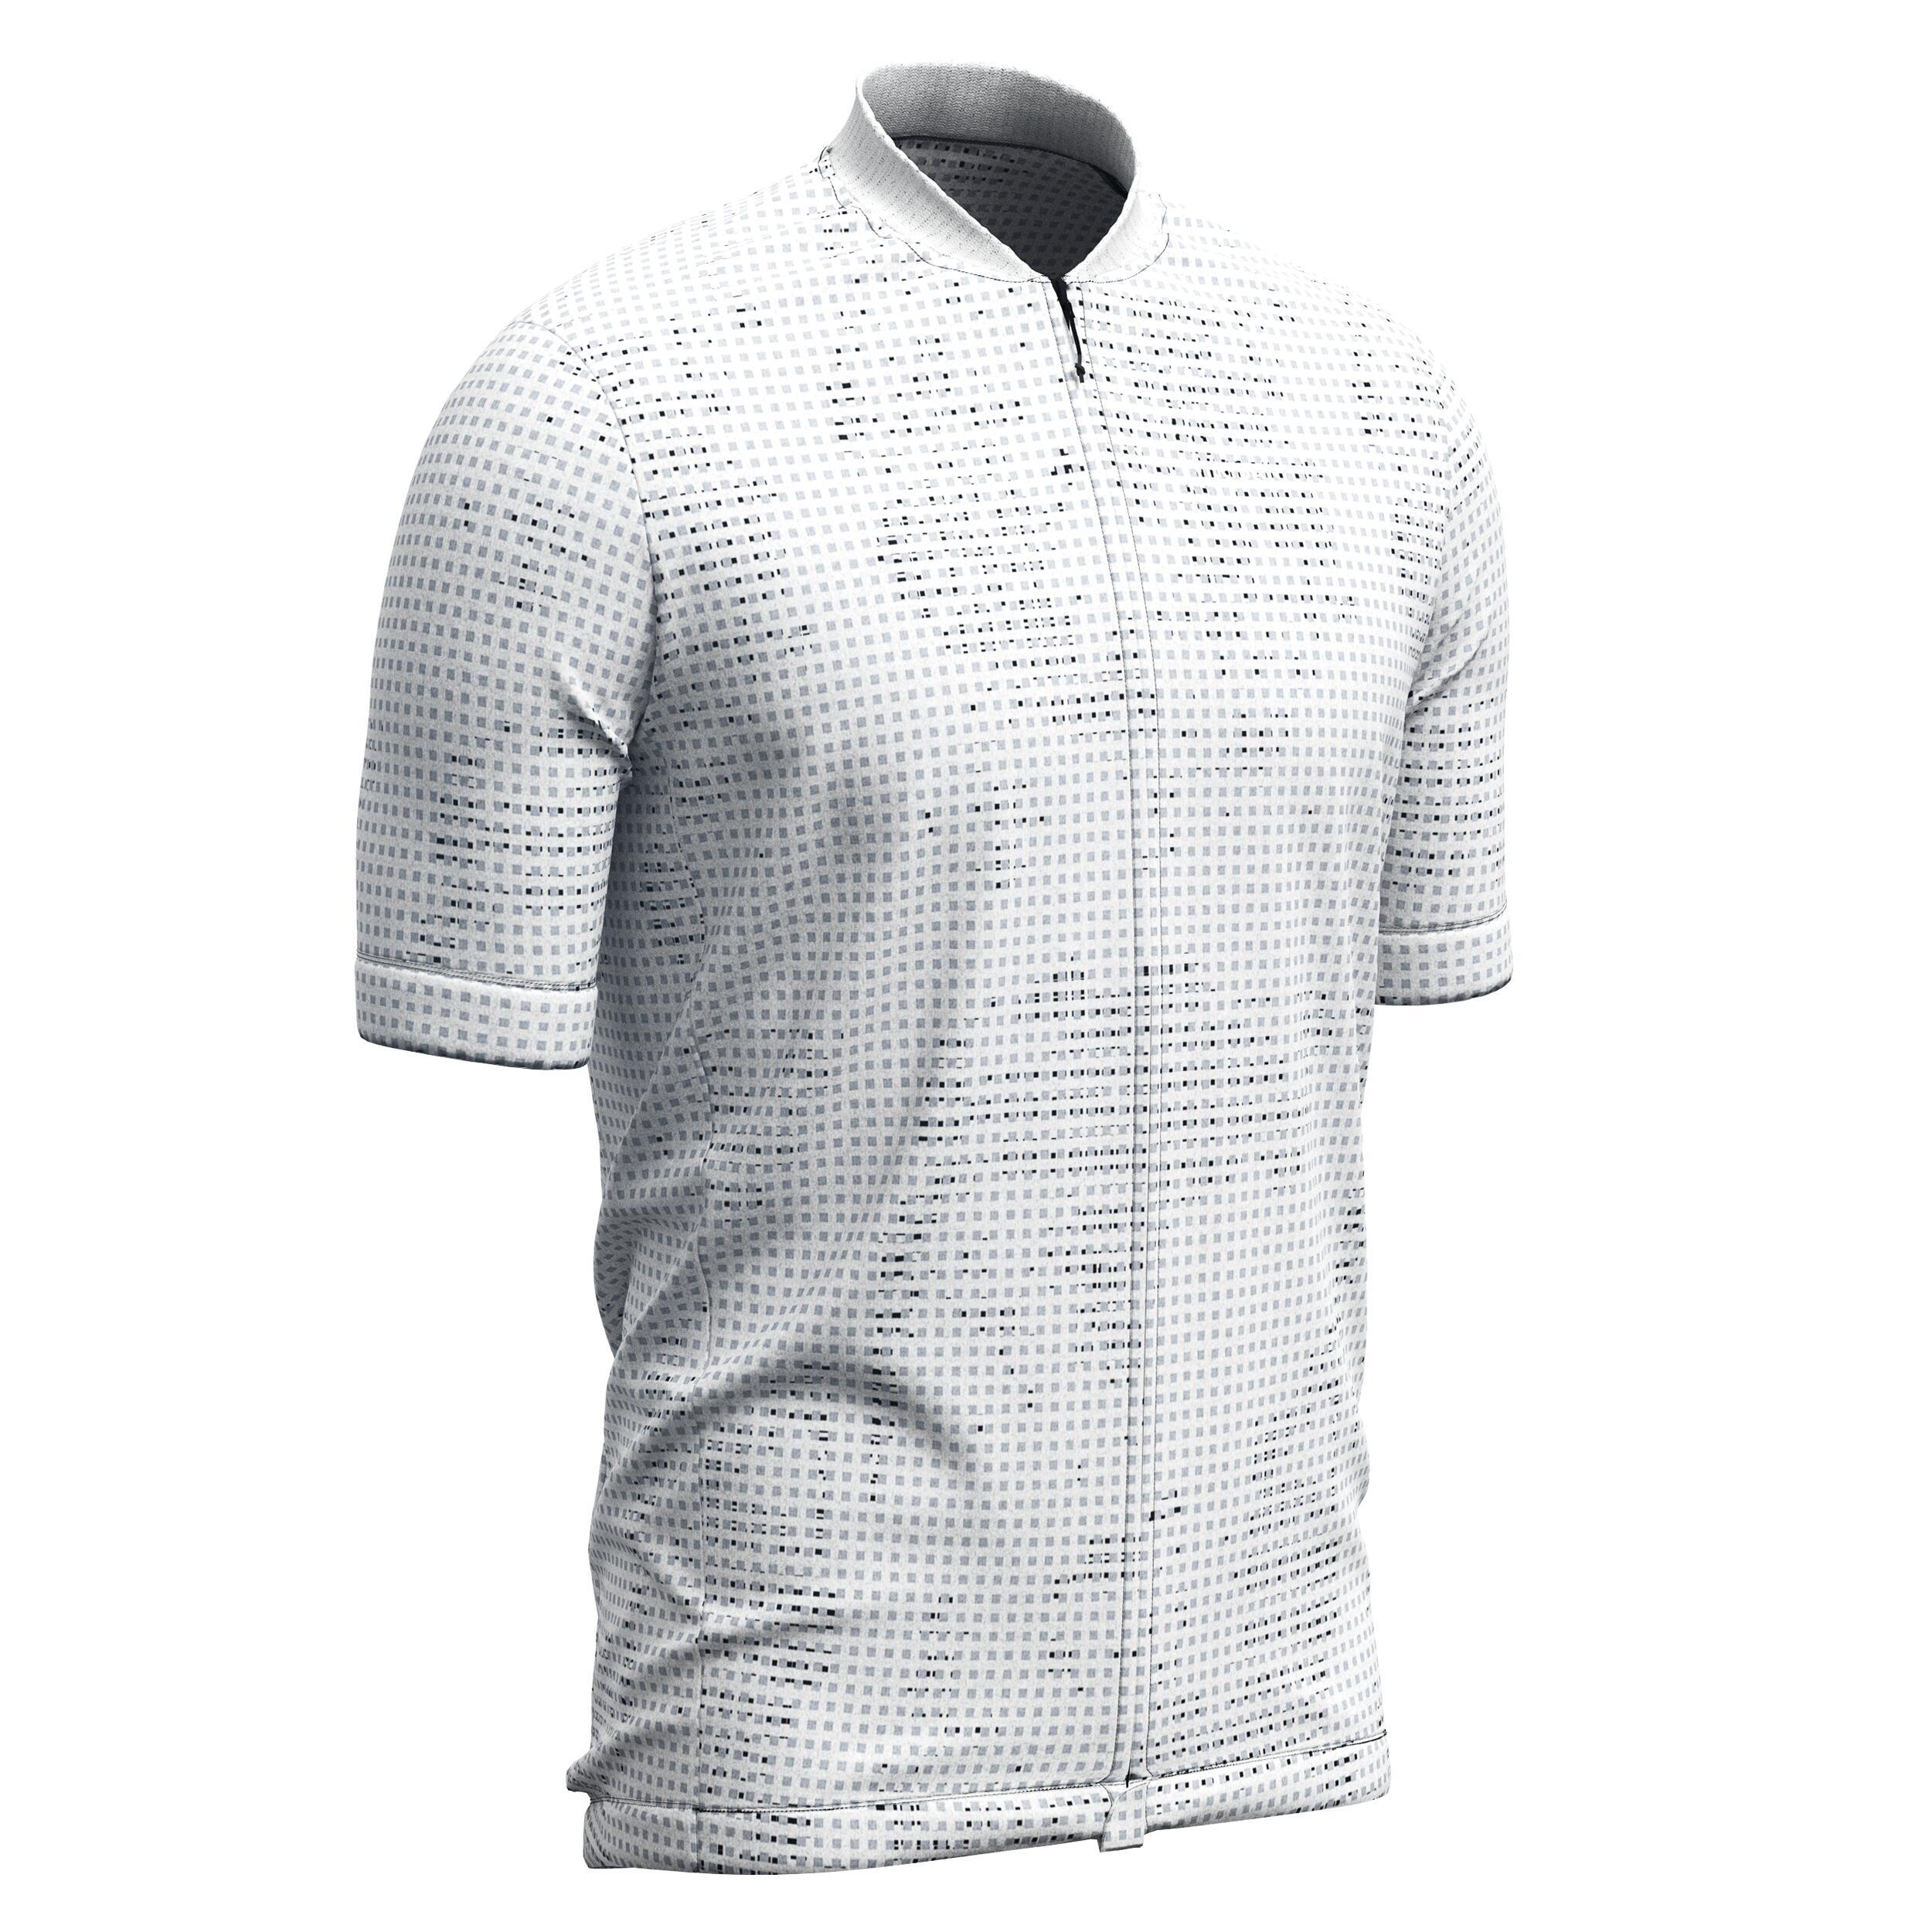 VAN RYSEL Men's Short-Sleeved Road Cycling Summer Jersey RC100 - White